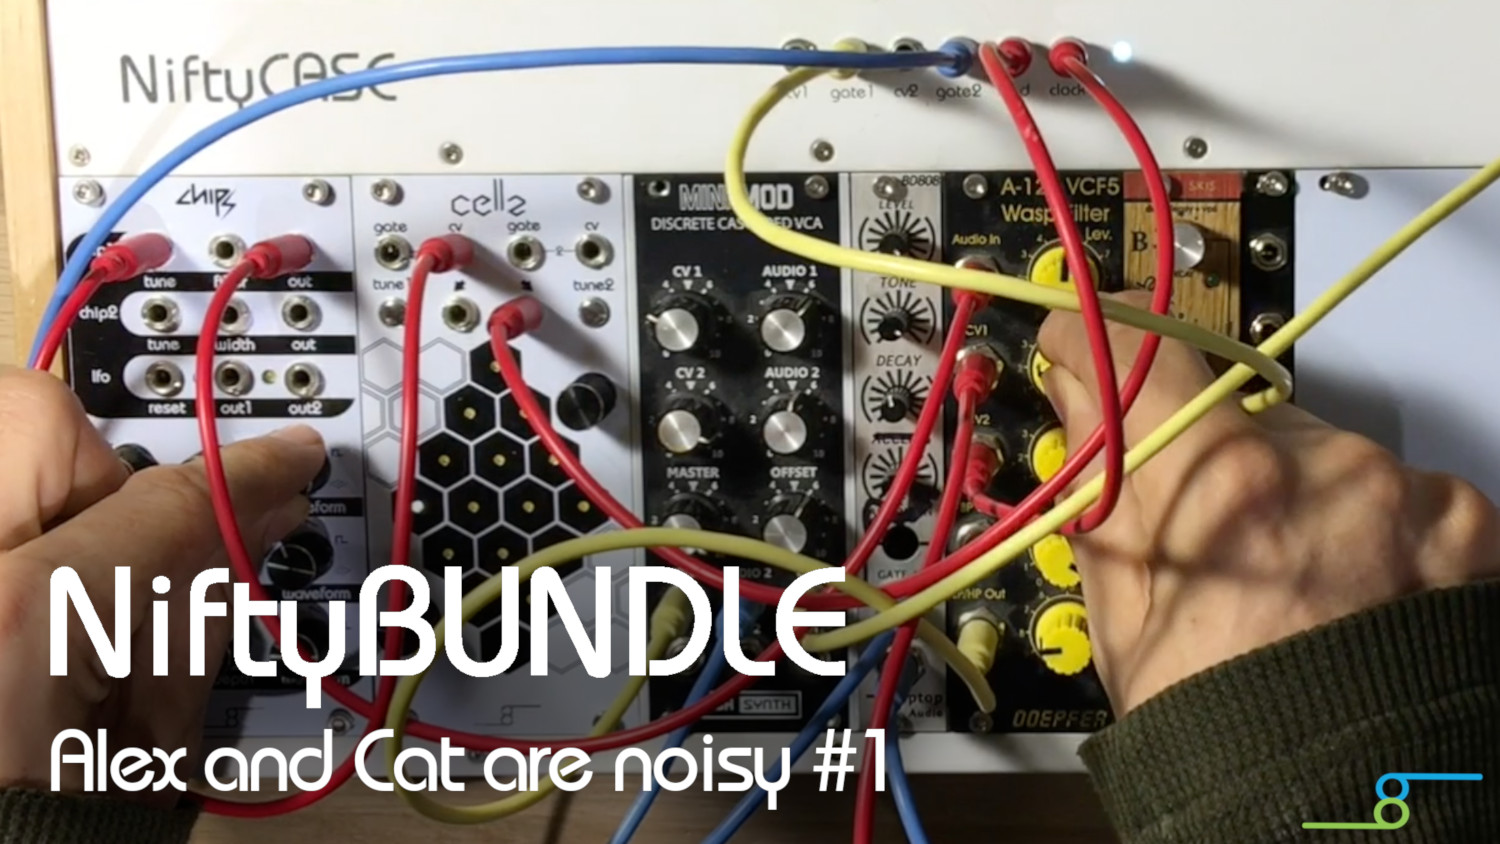 NiftyCASE - Affordable Powered 84hp Eurorack Modular Synthesizer